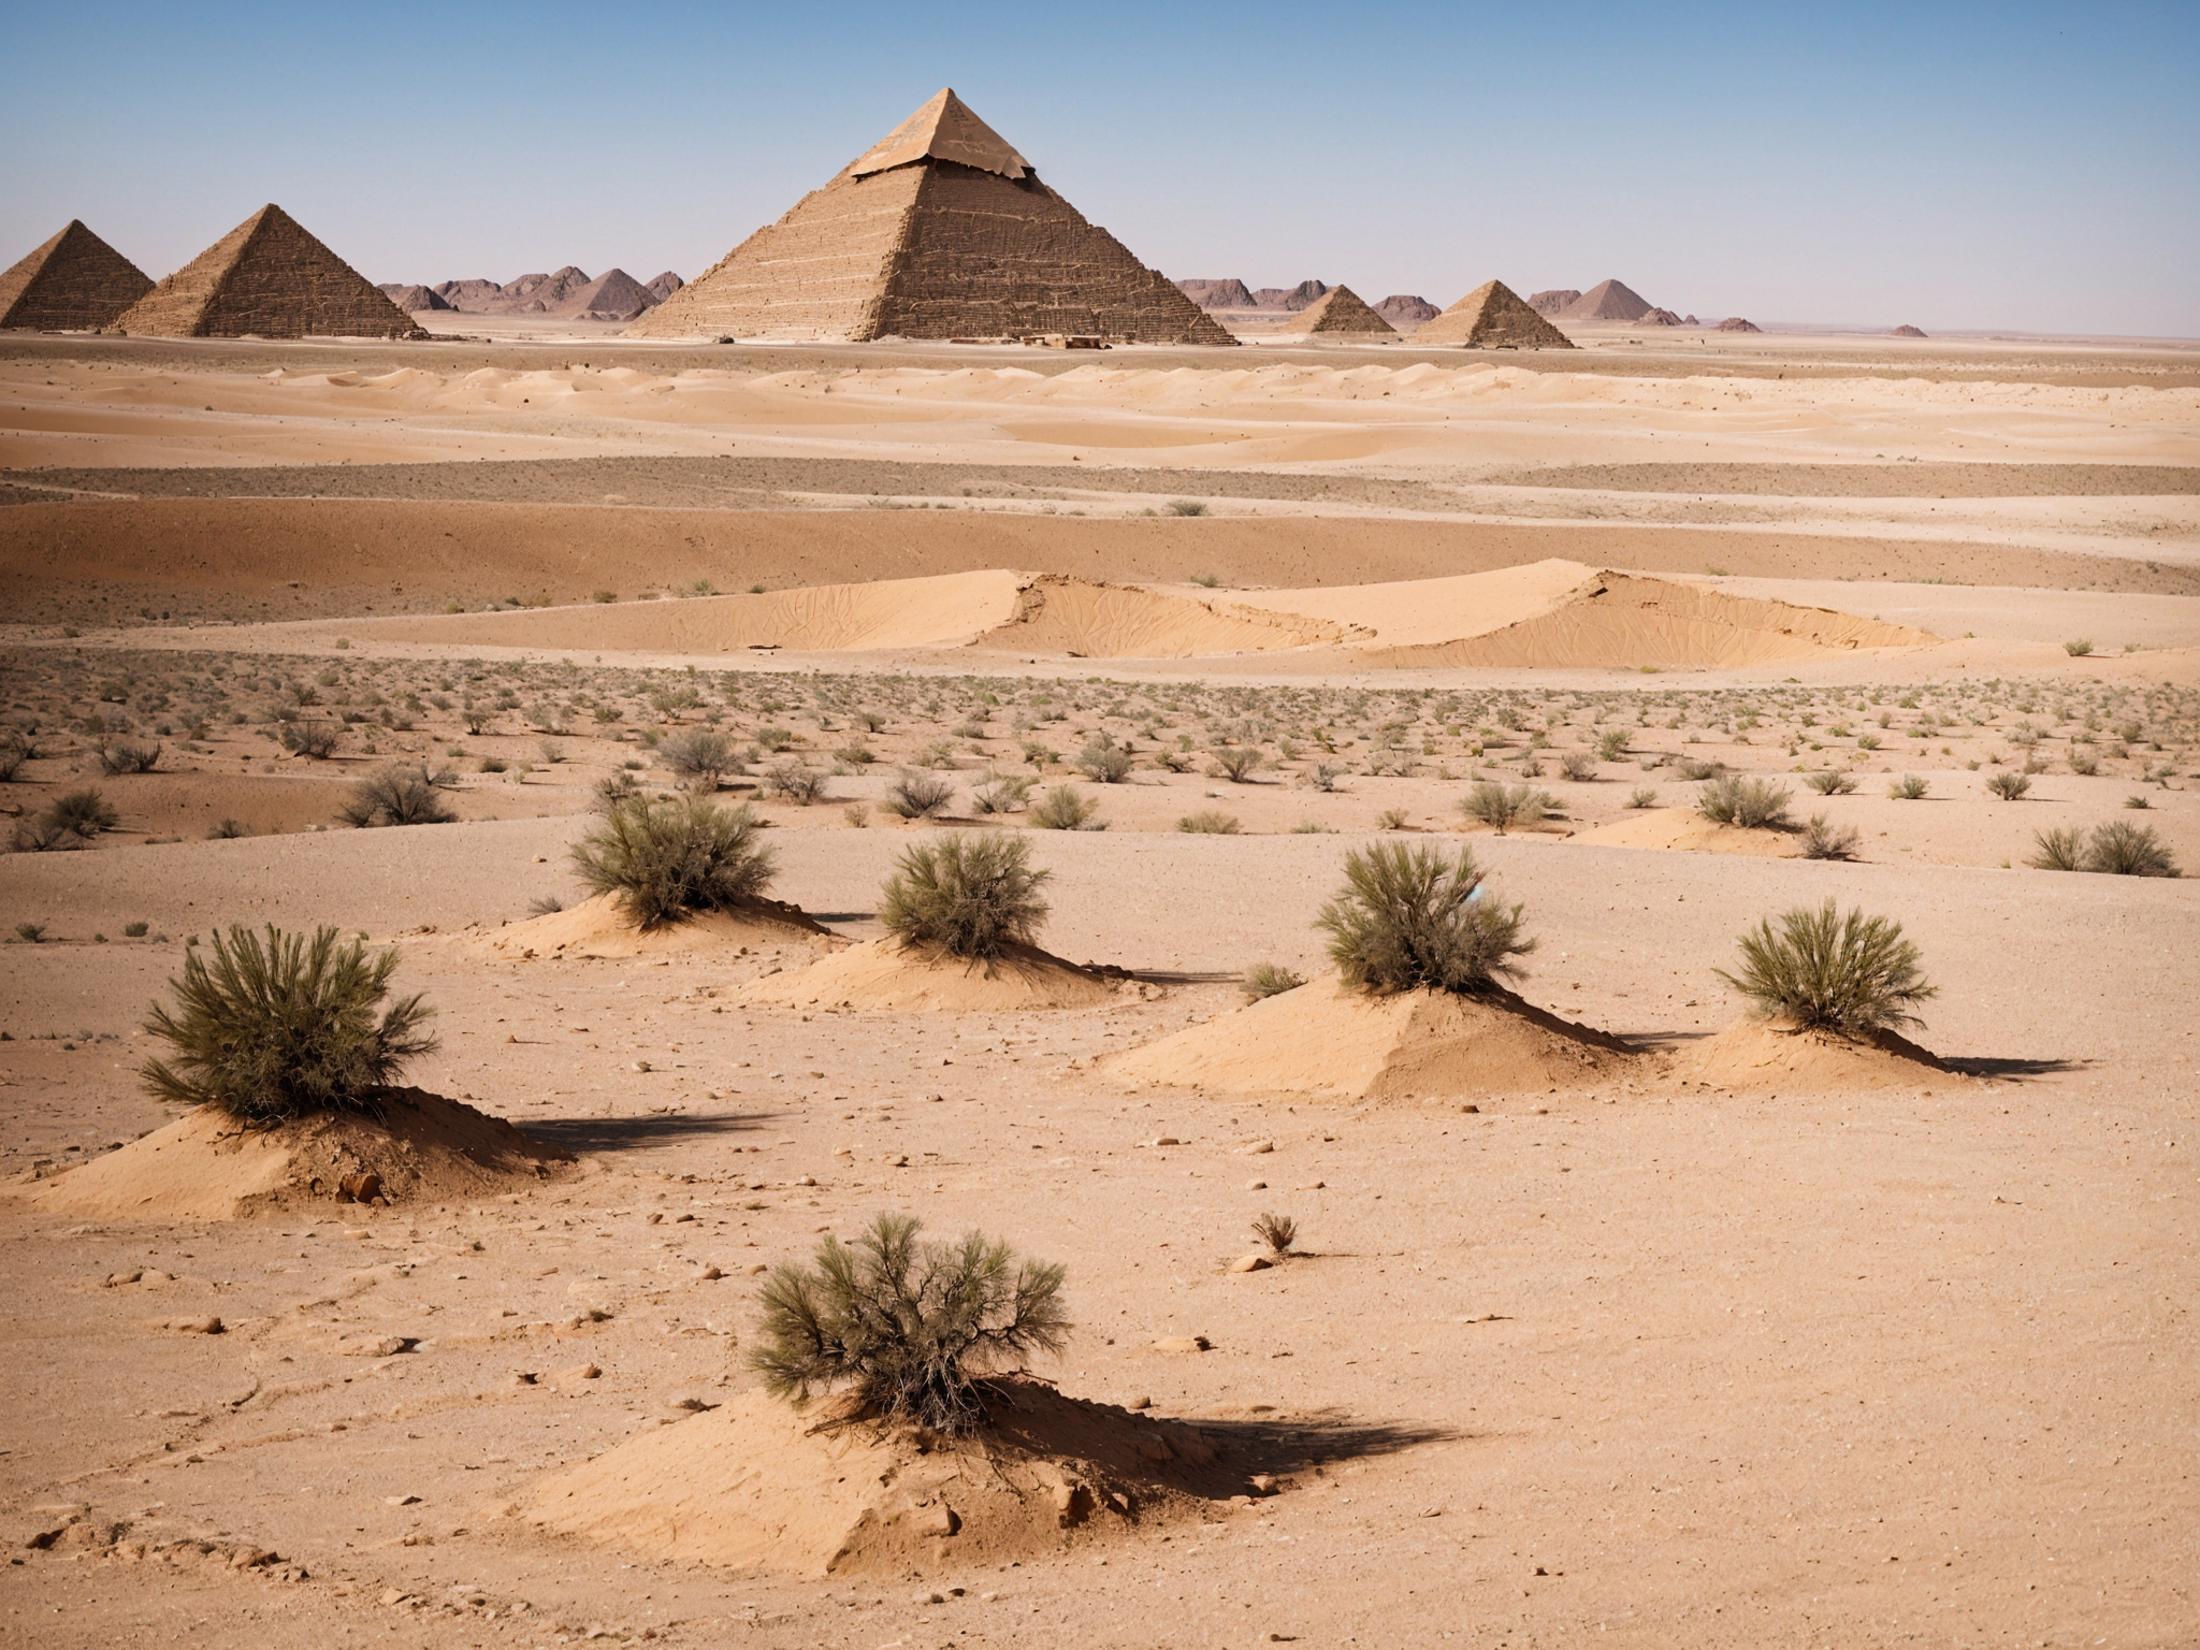 A Dry Desert Landscape with Ancient Pyramids in the Distance